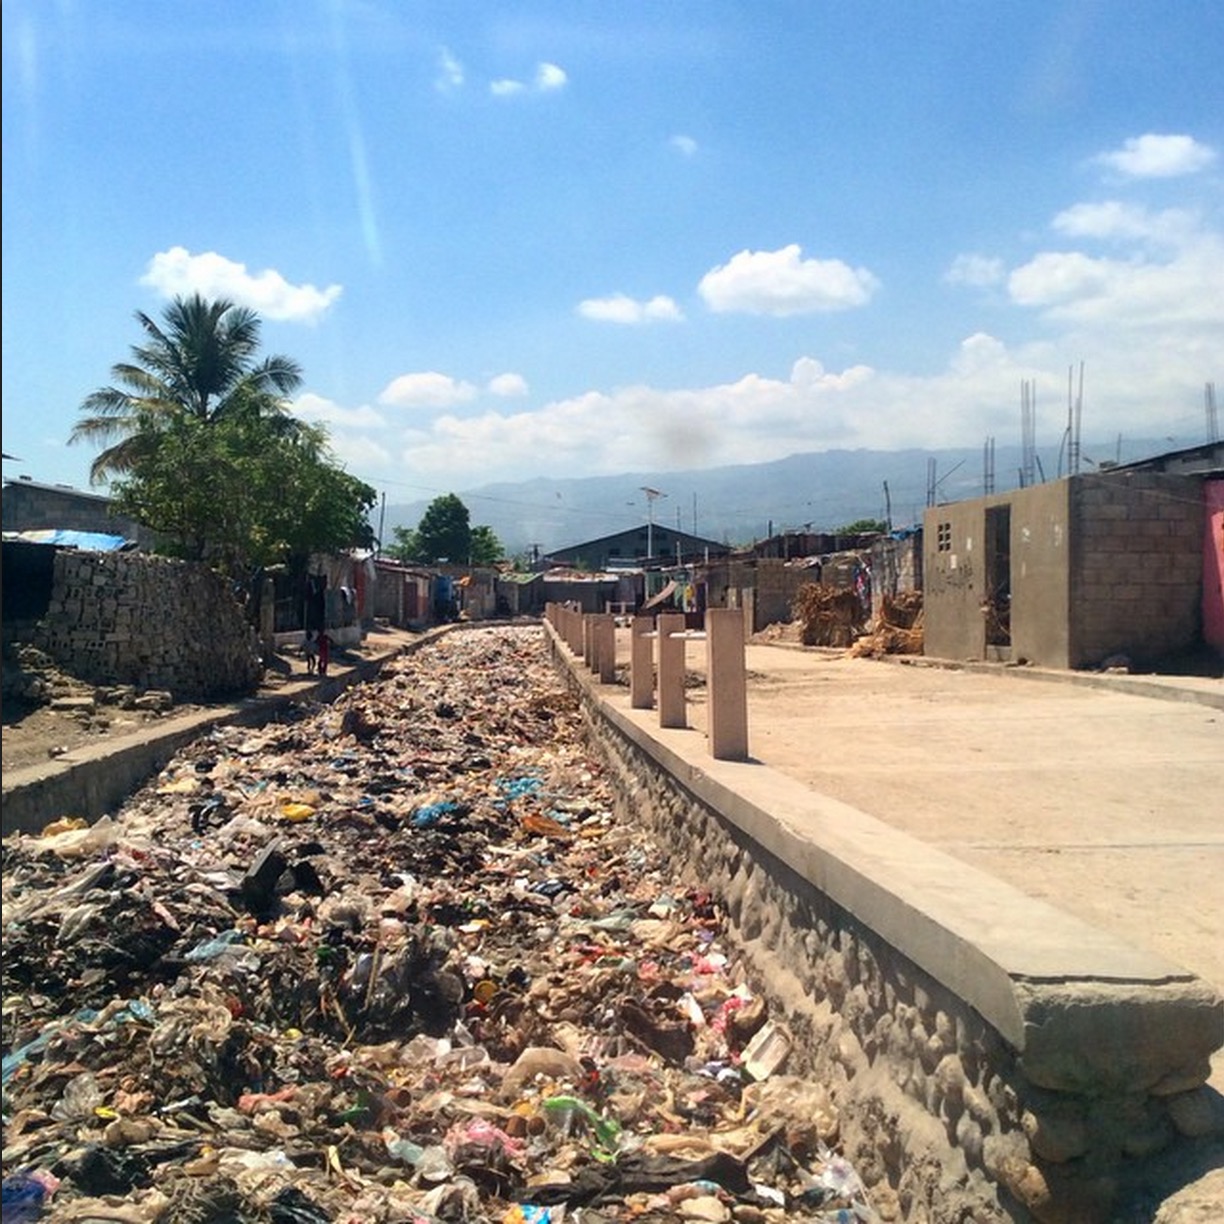 Cite Soleil lies at the lowest point of Port-au-Prince